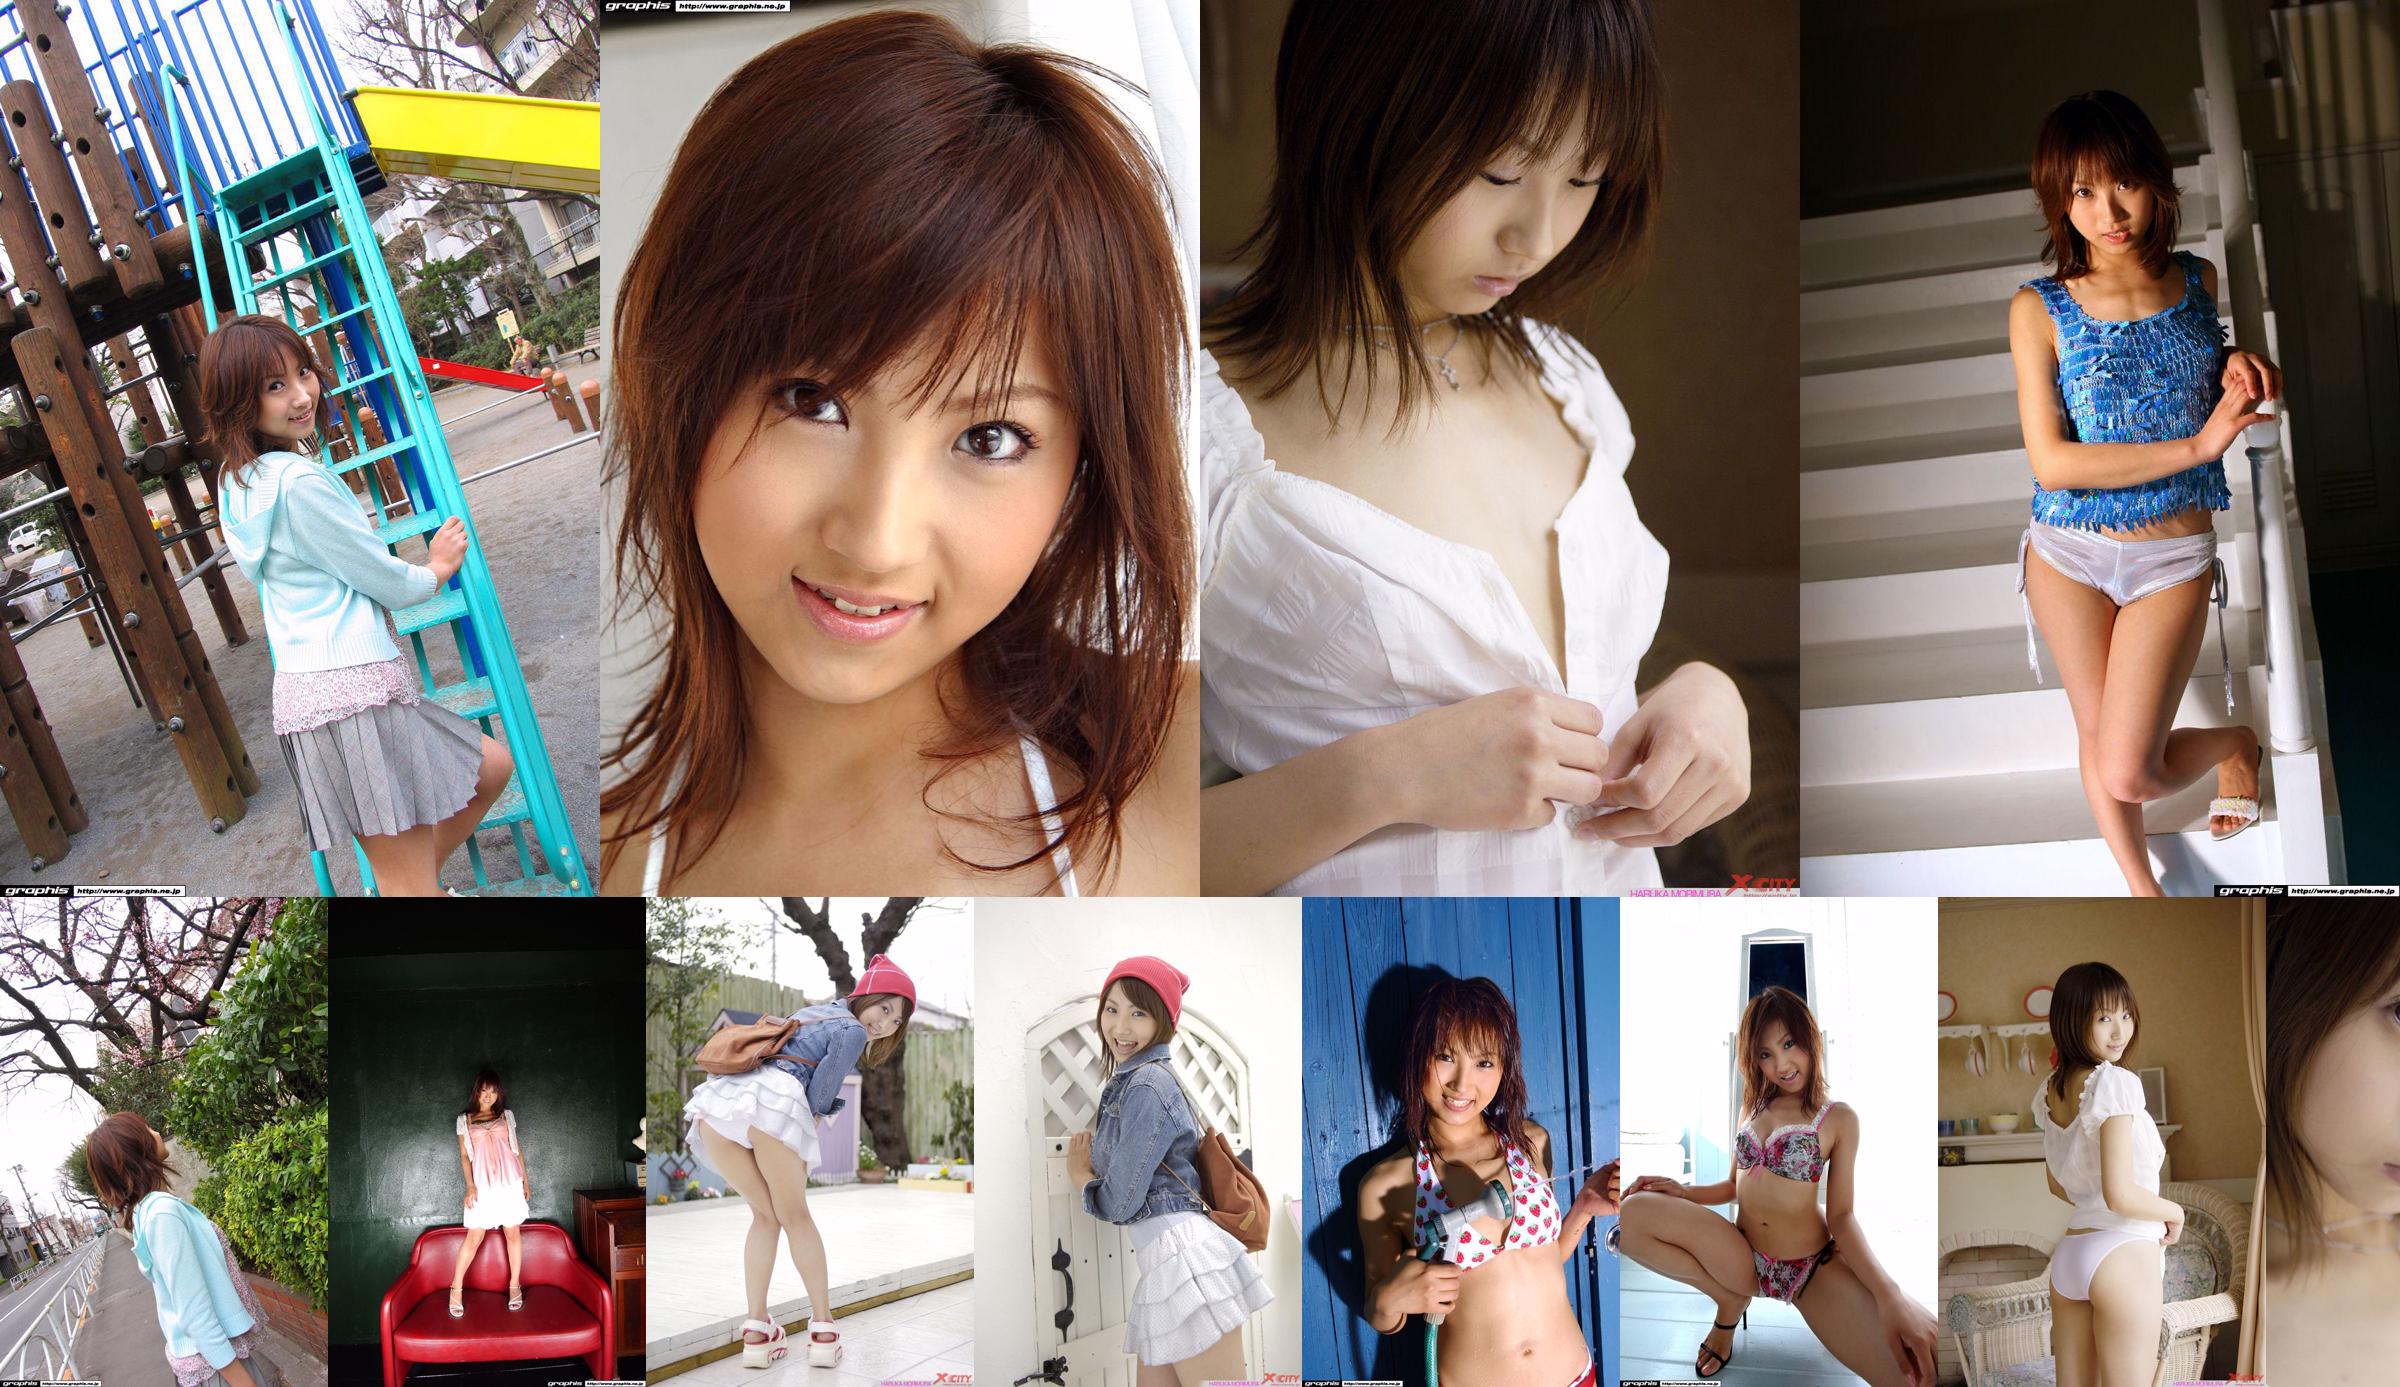 Haruka Morimura "Once upon a Moment" [Graphis] Gals No.13b9d1 Page 2